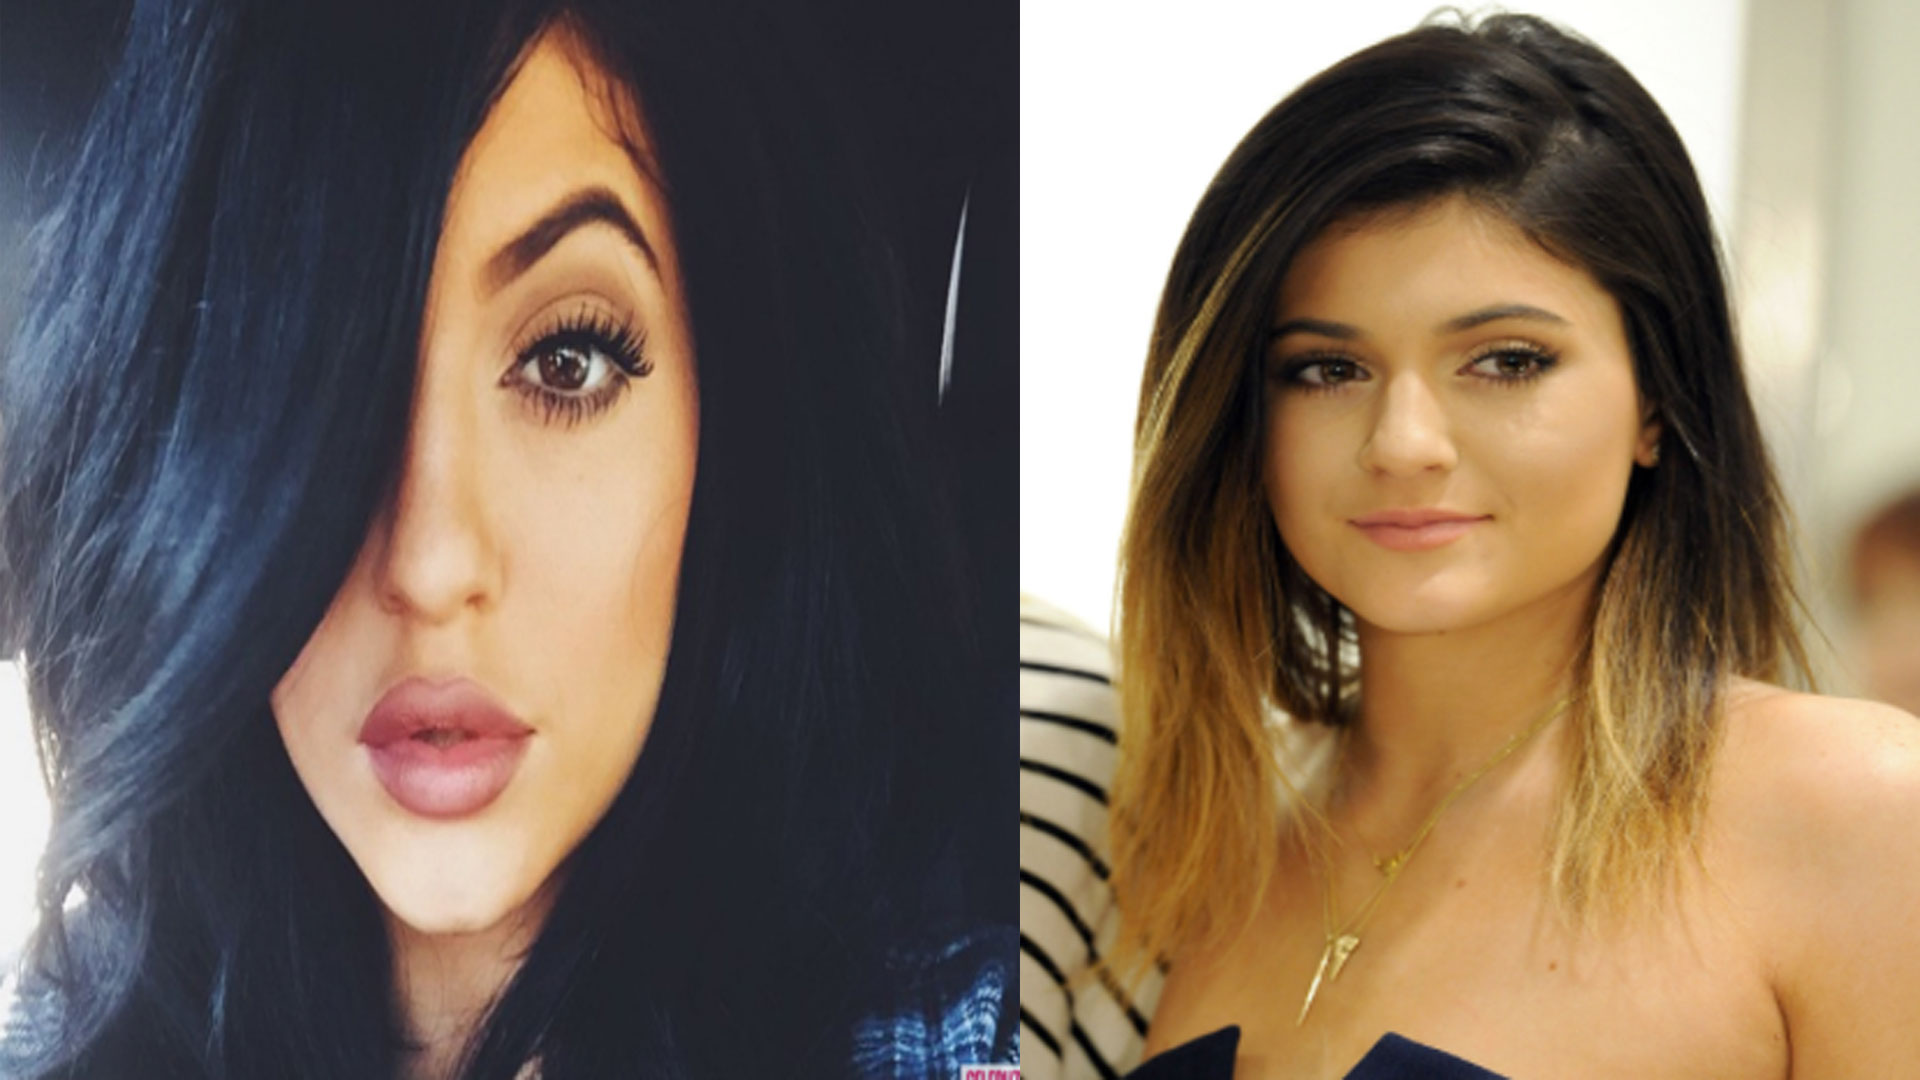 Kylie Jenner’s Lips Now In Comparison To A Couple Years - Facelift Before And After On Young People - HD Wallpaper 